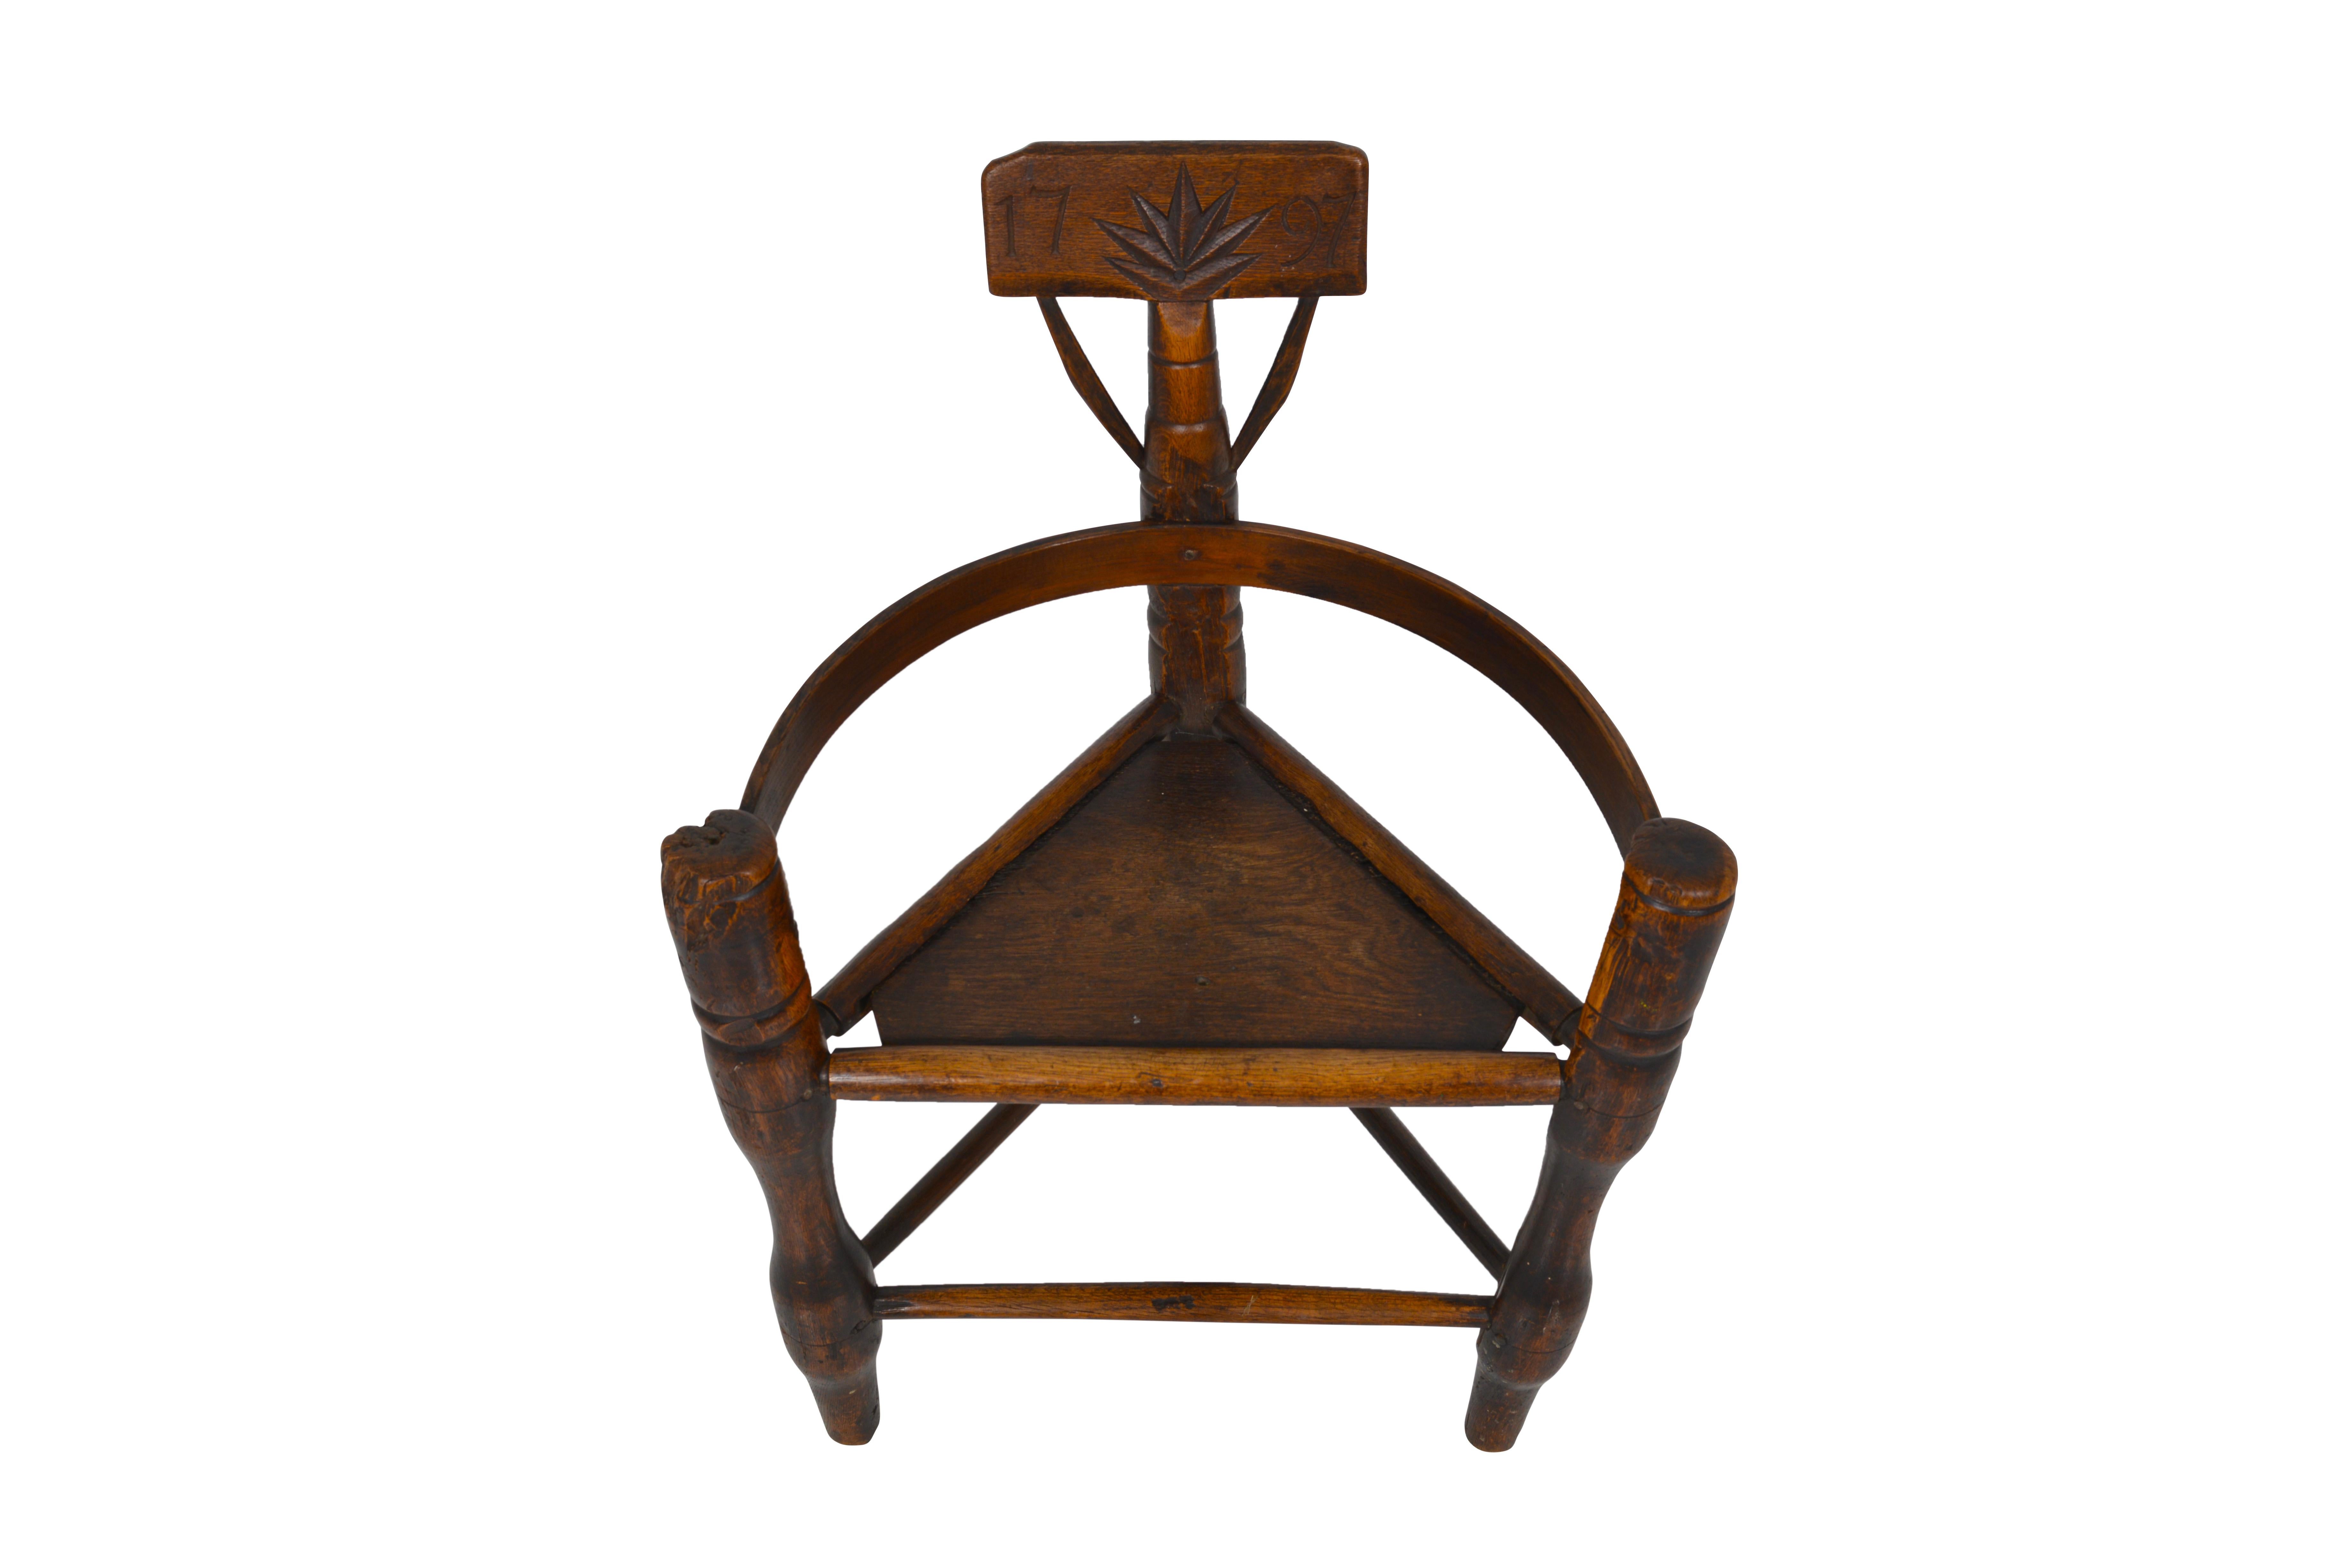 Triangular three-legged primitive chair called Turners’ Chair. Made from English oak, this chair has good color and patina. Turners’ chairs were made by wood turners in pre-Elizabethan age before joiners took over furniture making from turners and